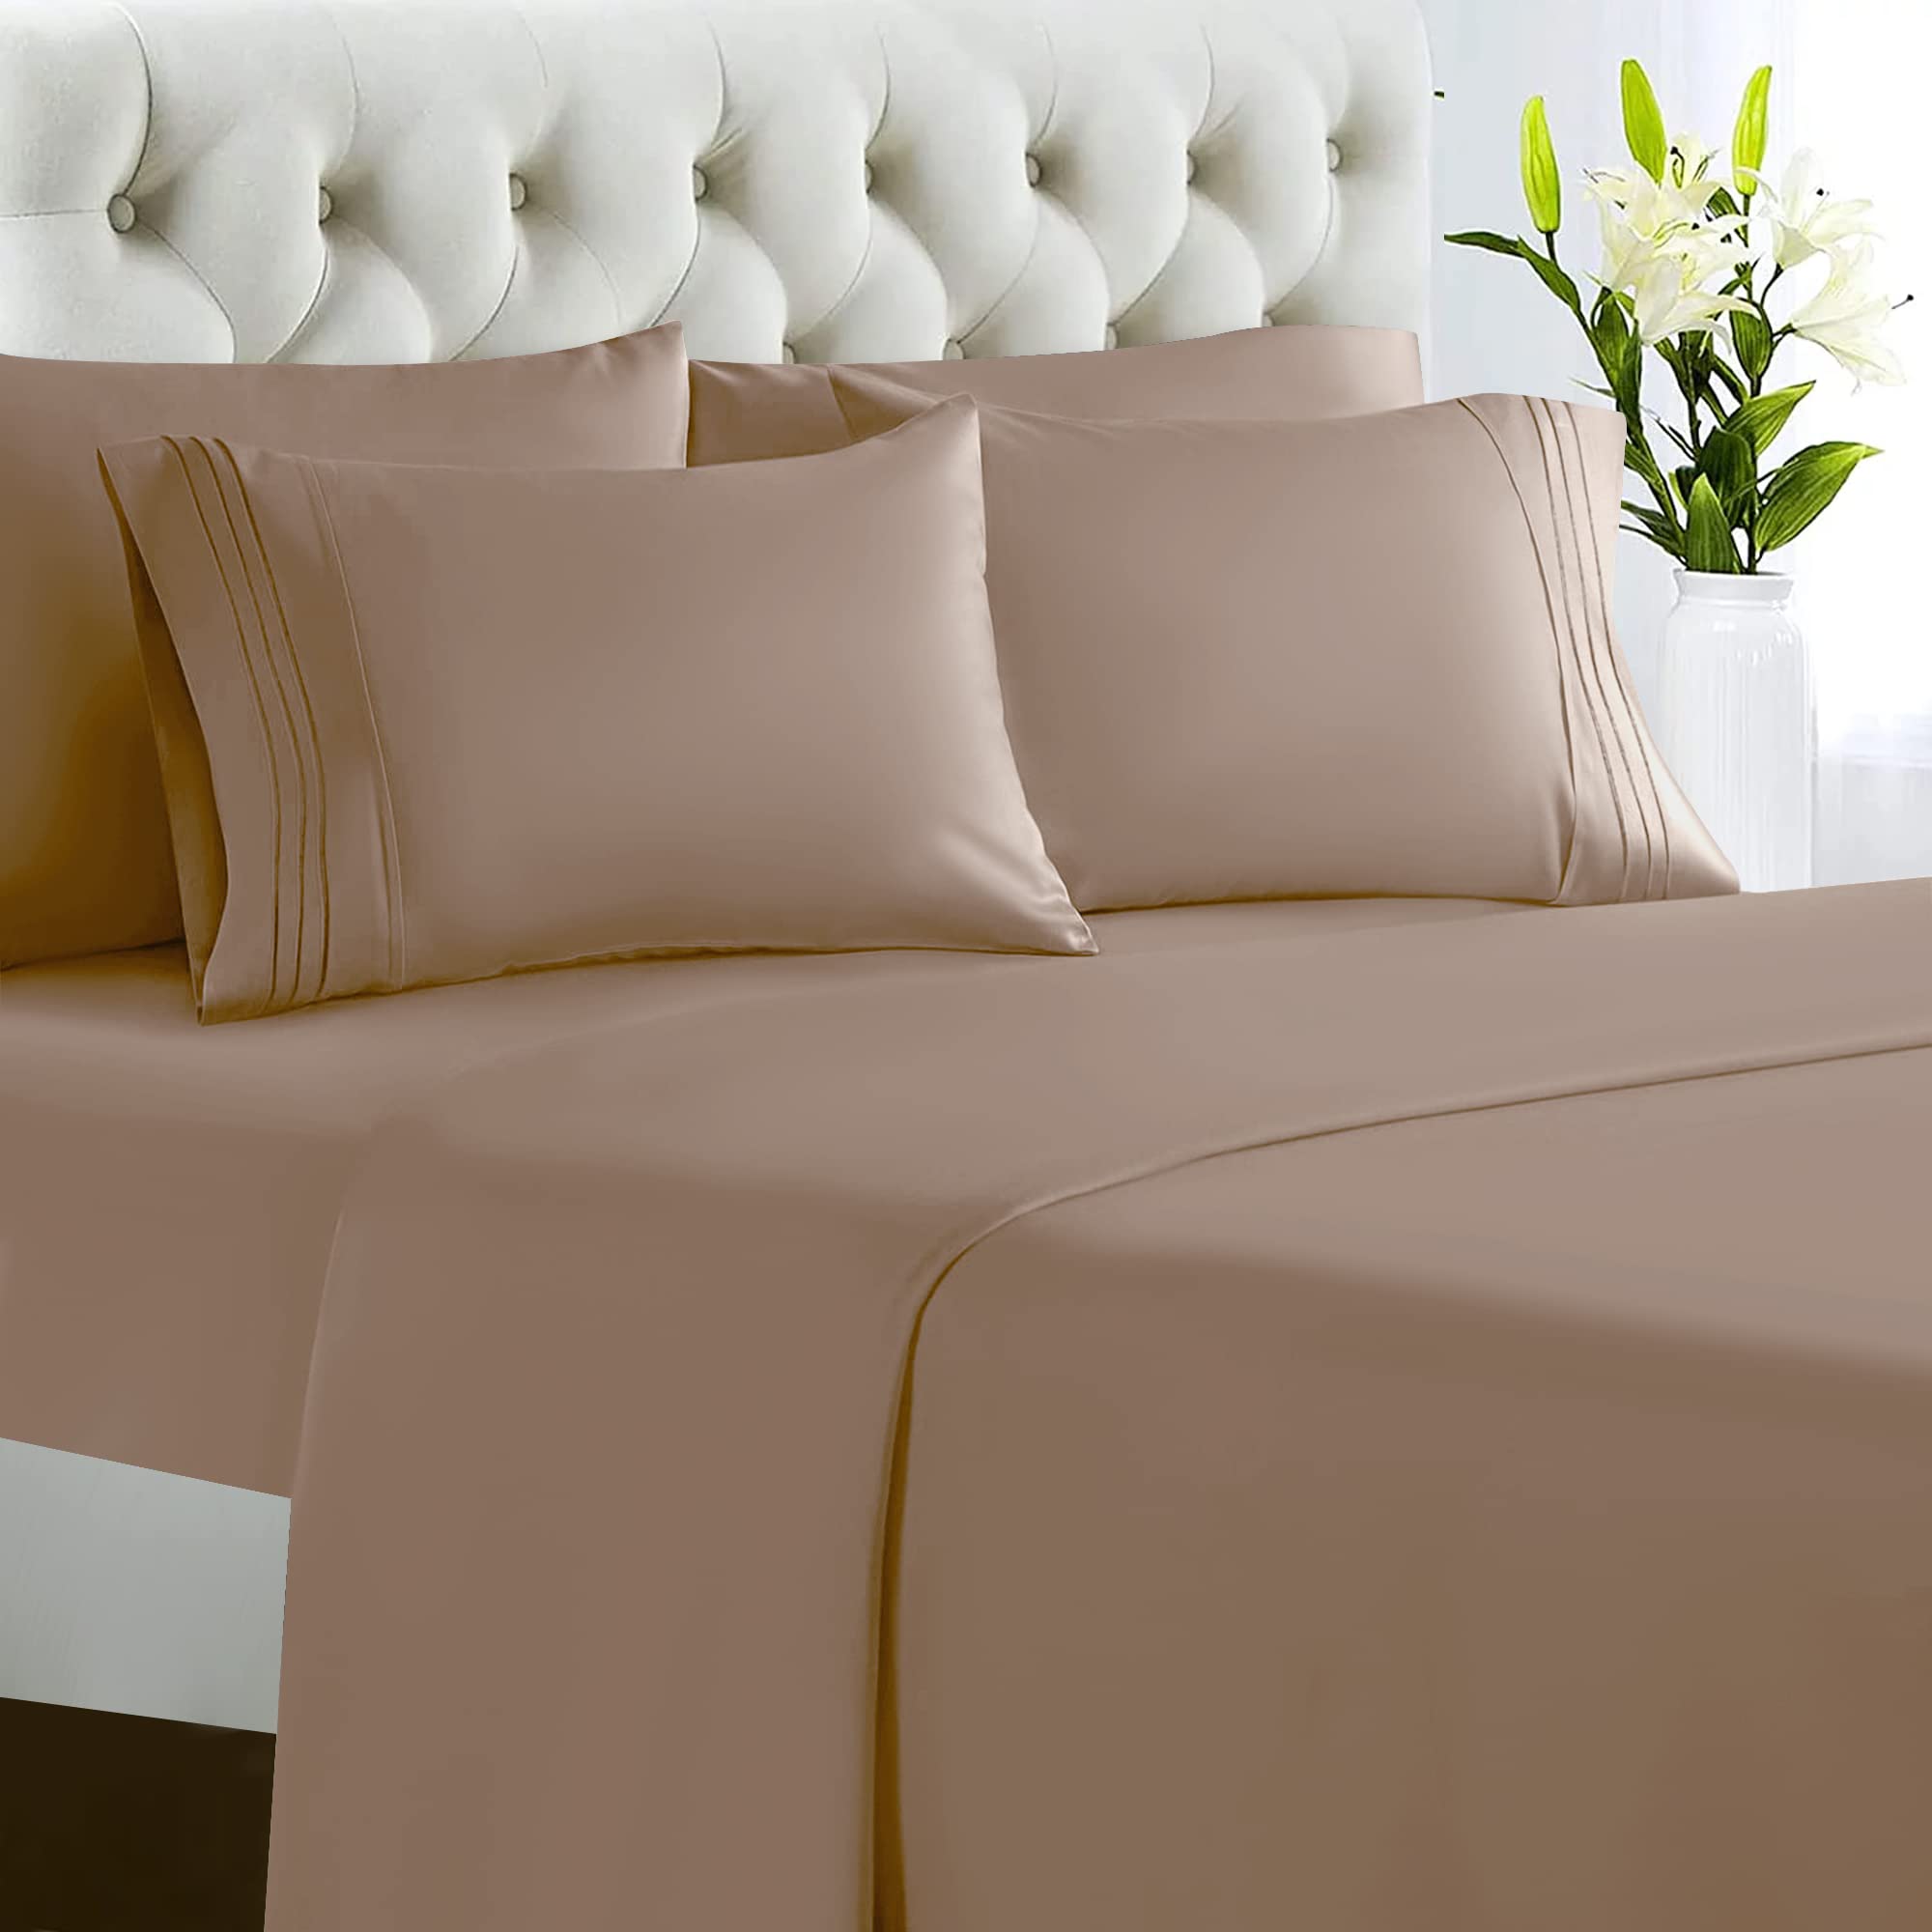 Book Cover Lux Decor Collection Bed Sheets - 6 Pc Sheets for Queen Size Bed - 1800 Thread Count Brushed Microfiber Sheets - 16 Inches Deep Pocket Bedding Sheets & Pillowcases|Lightweight Sheets| Queen Sheets Embroidery Taupe Queen